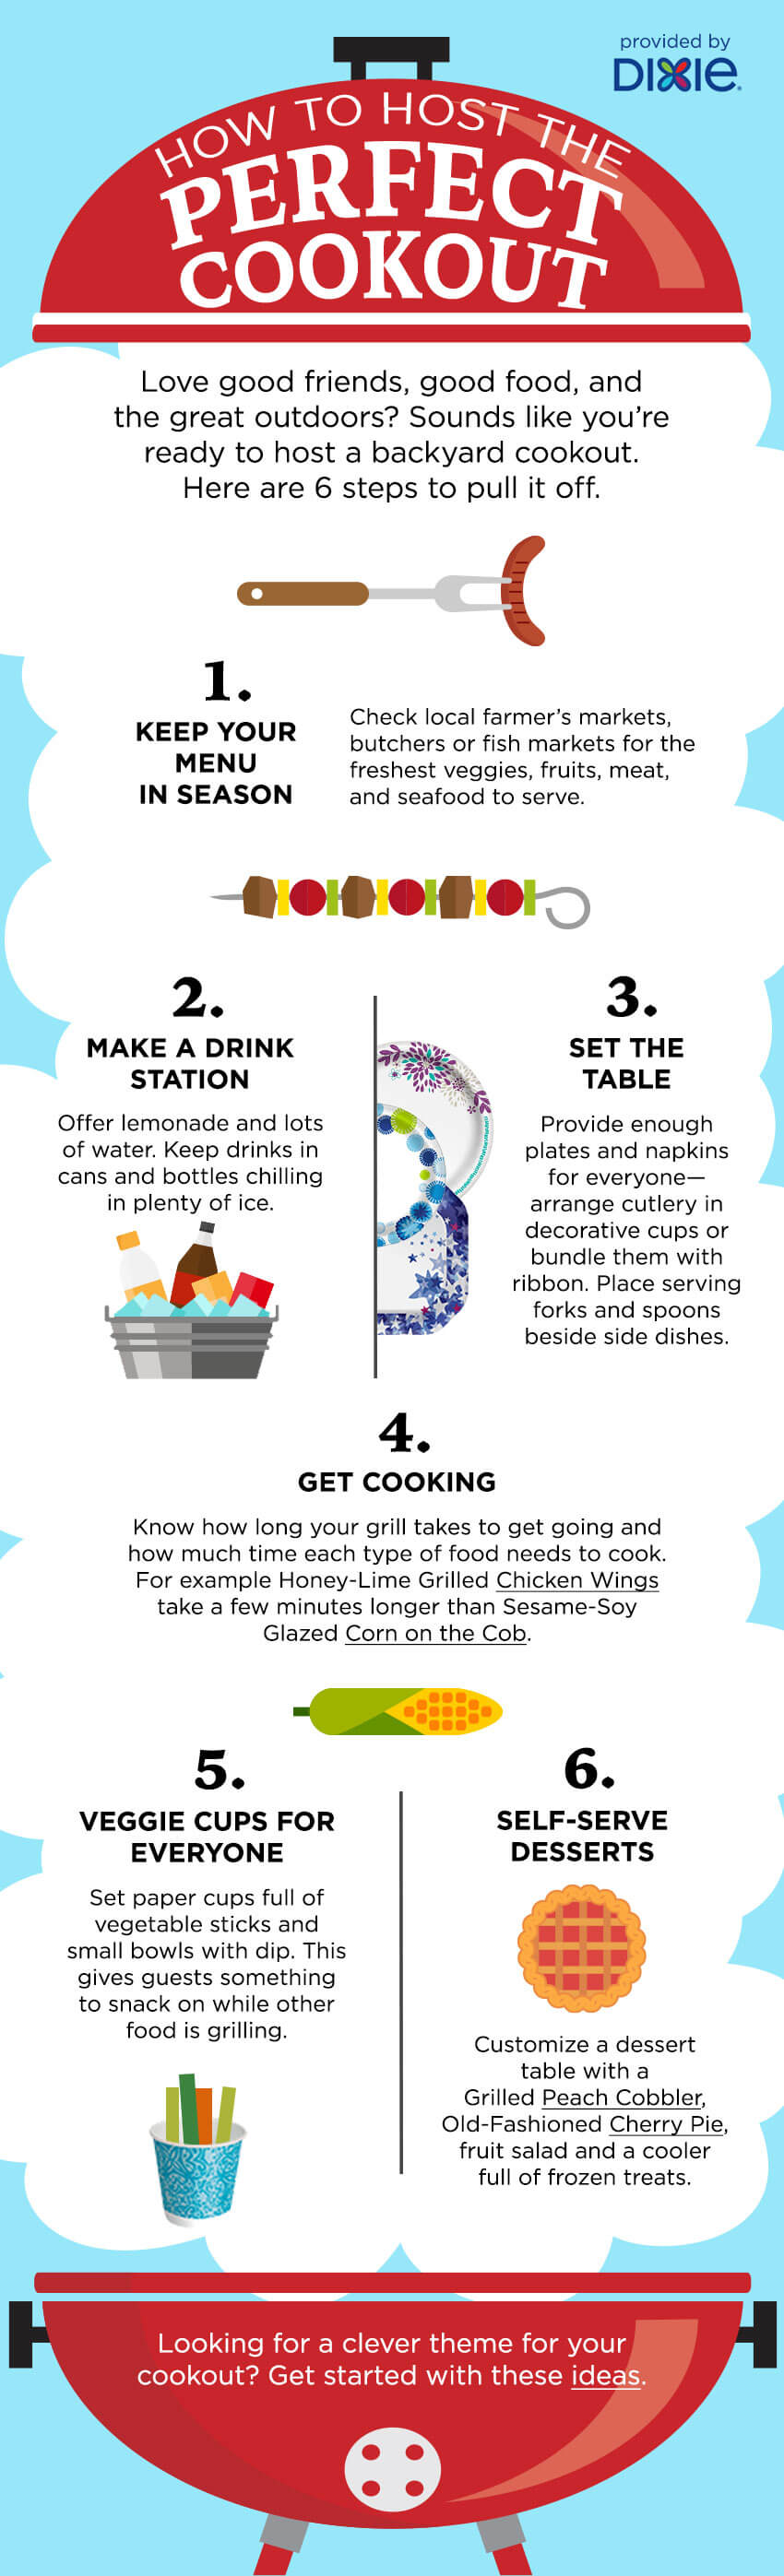 How To Host The Perfect Cookout With Dixie (Infographic).